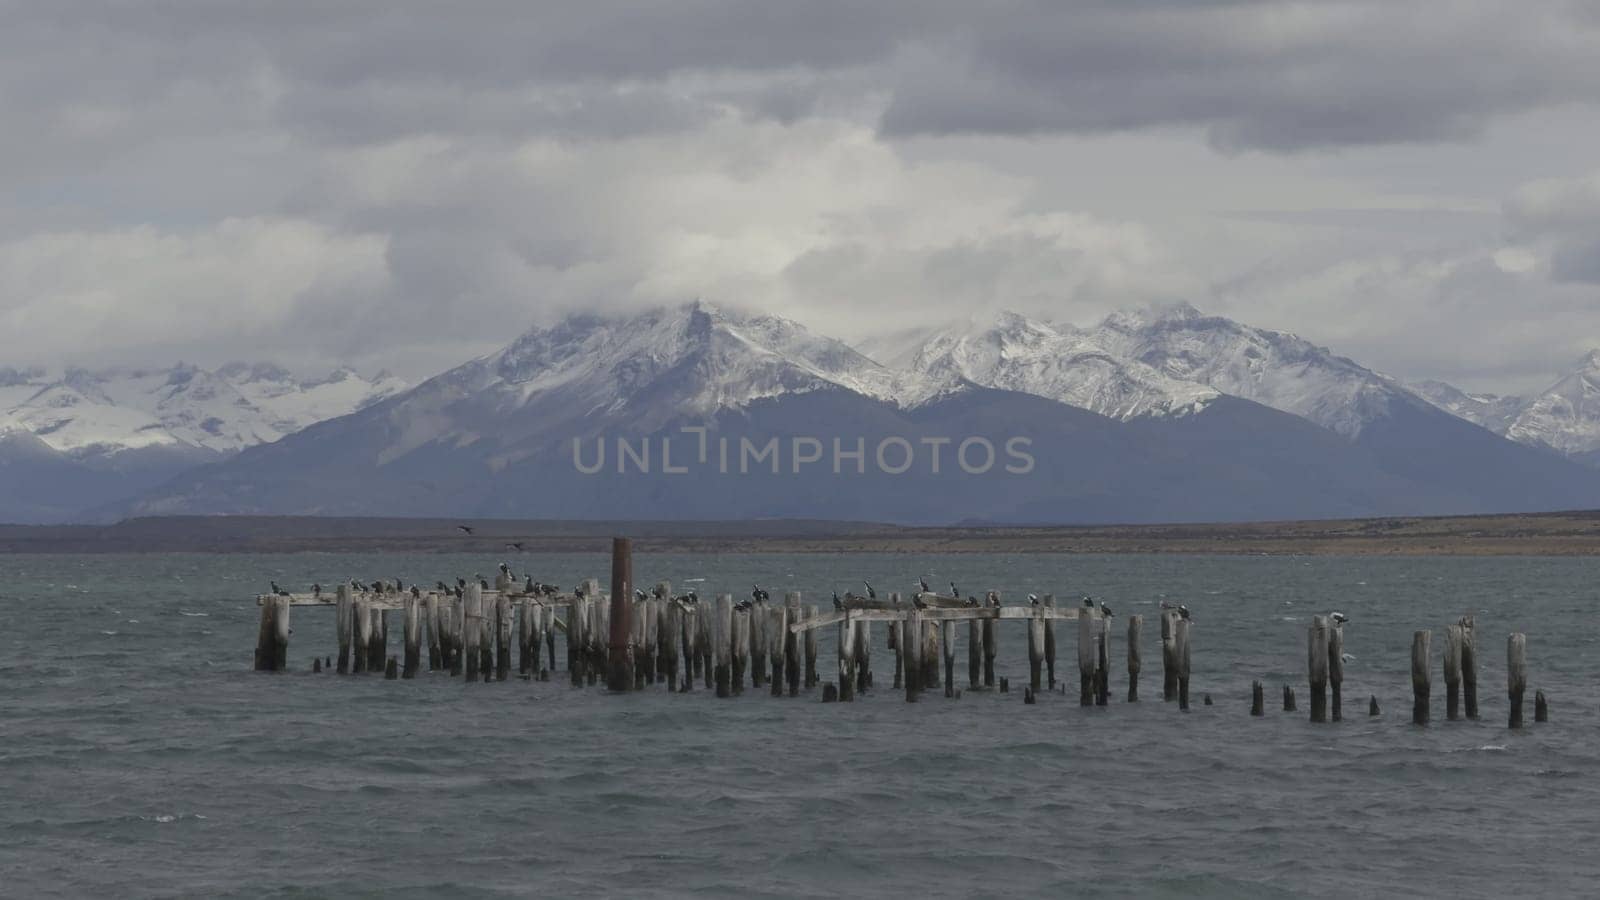 Deserted wooden pier in Puerto Natales with birds and a backdrop of snowy mountains and glaciers.